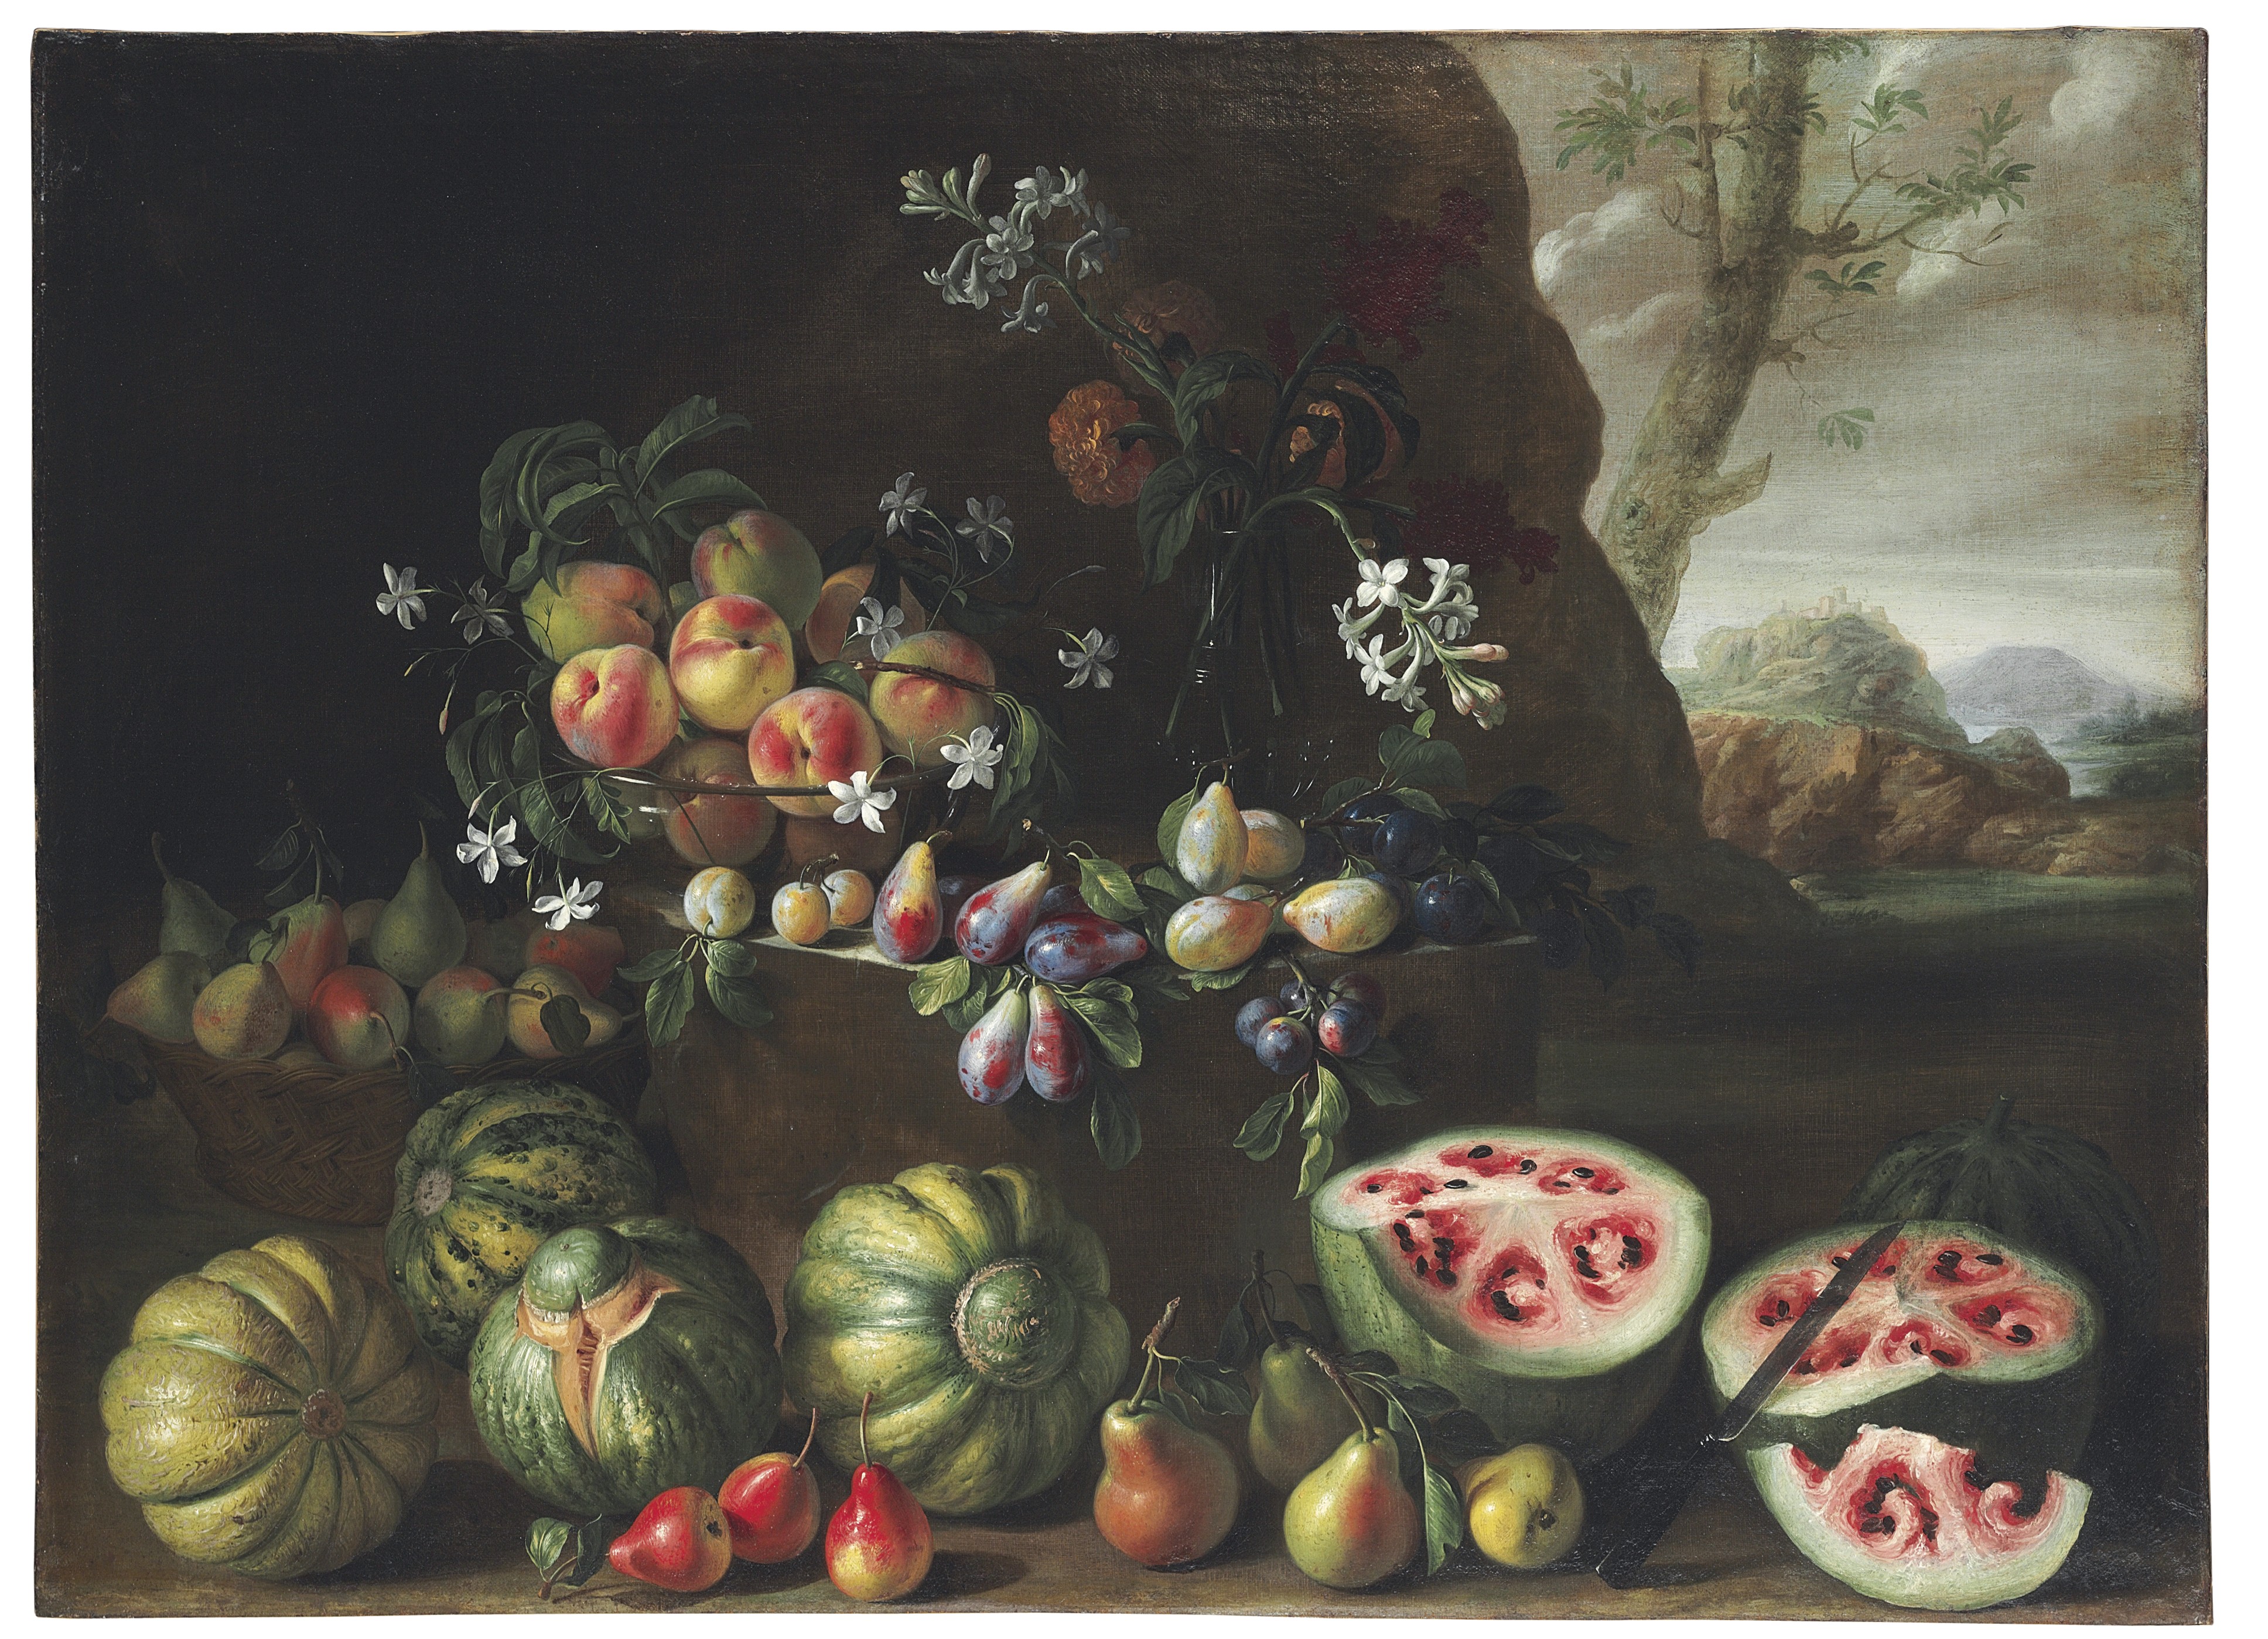 Giovanni Stanchi, Watermelons, Peaches, Pears, and Other Fruit in a Landscape